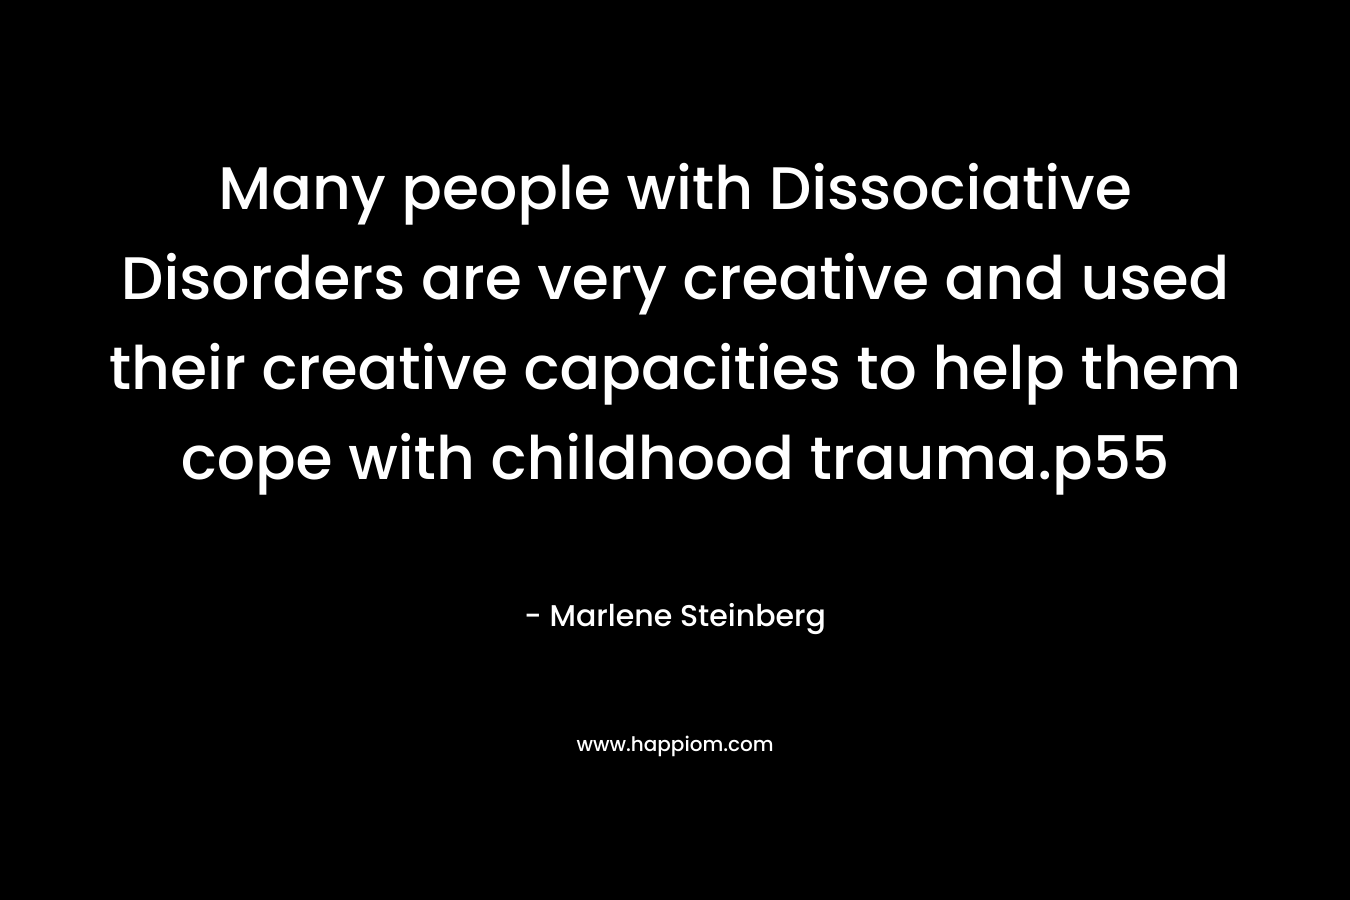 Many people with Dissociative Disorders are very creative and used their creative capacities to help them cope with childhood trauma.p55 – Marlene Steinberg